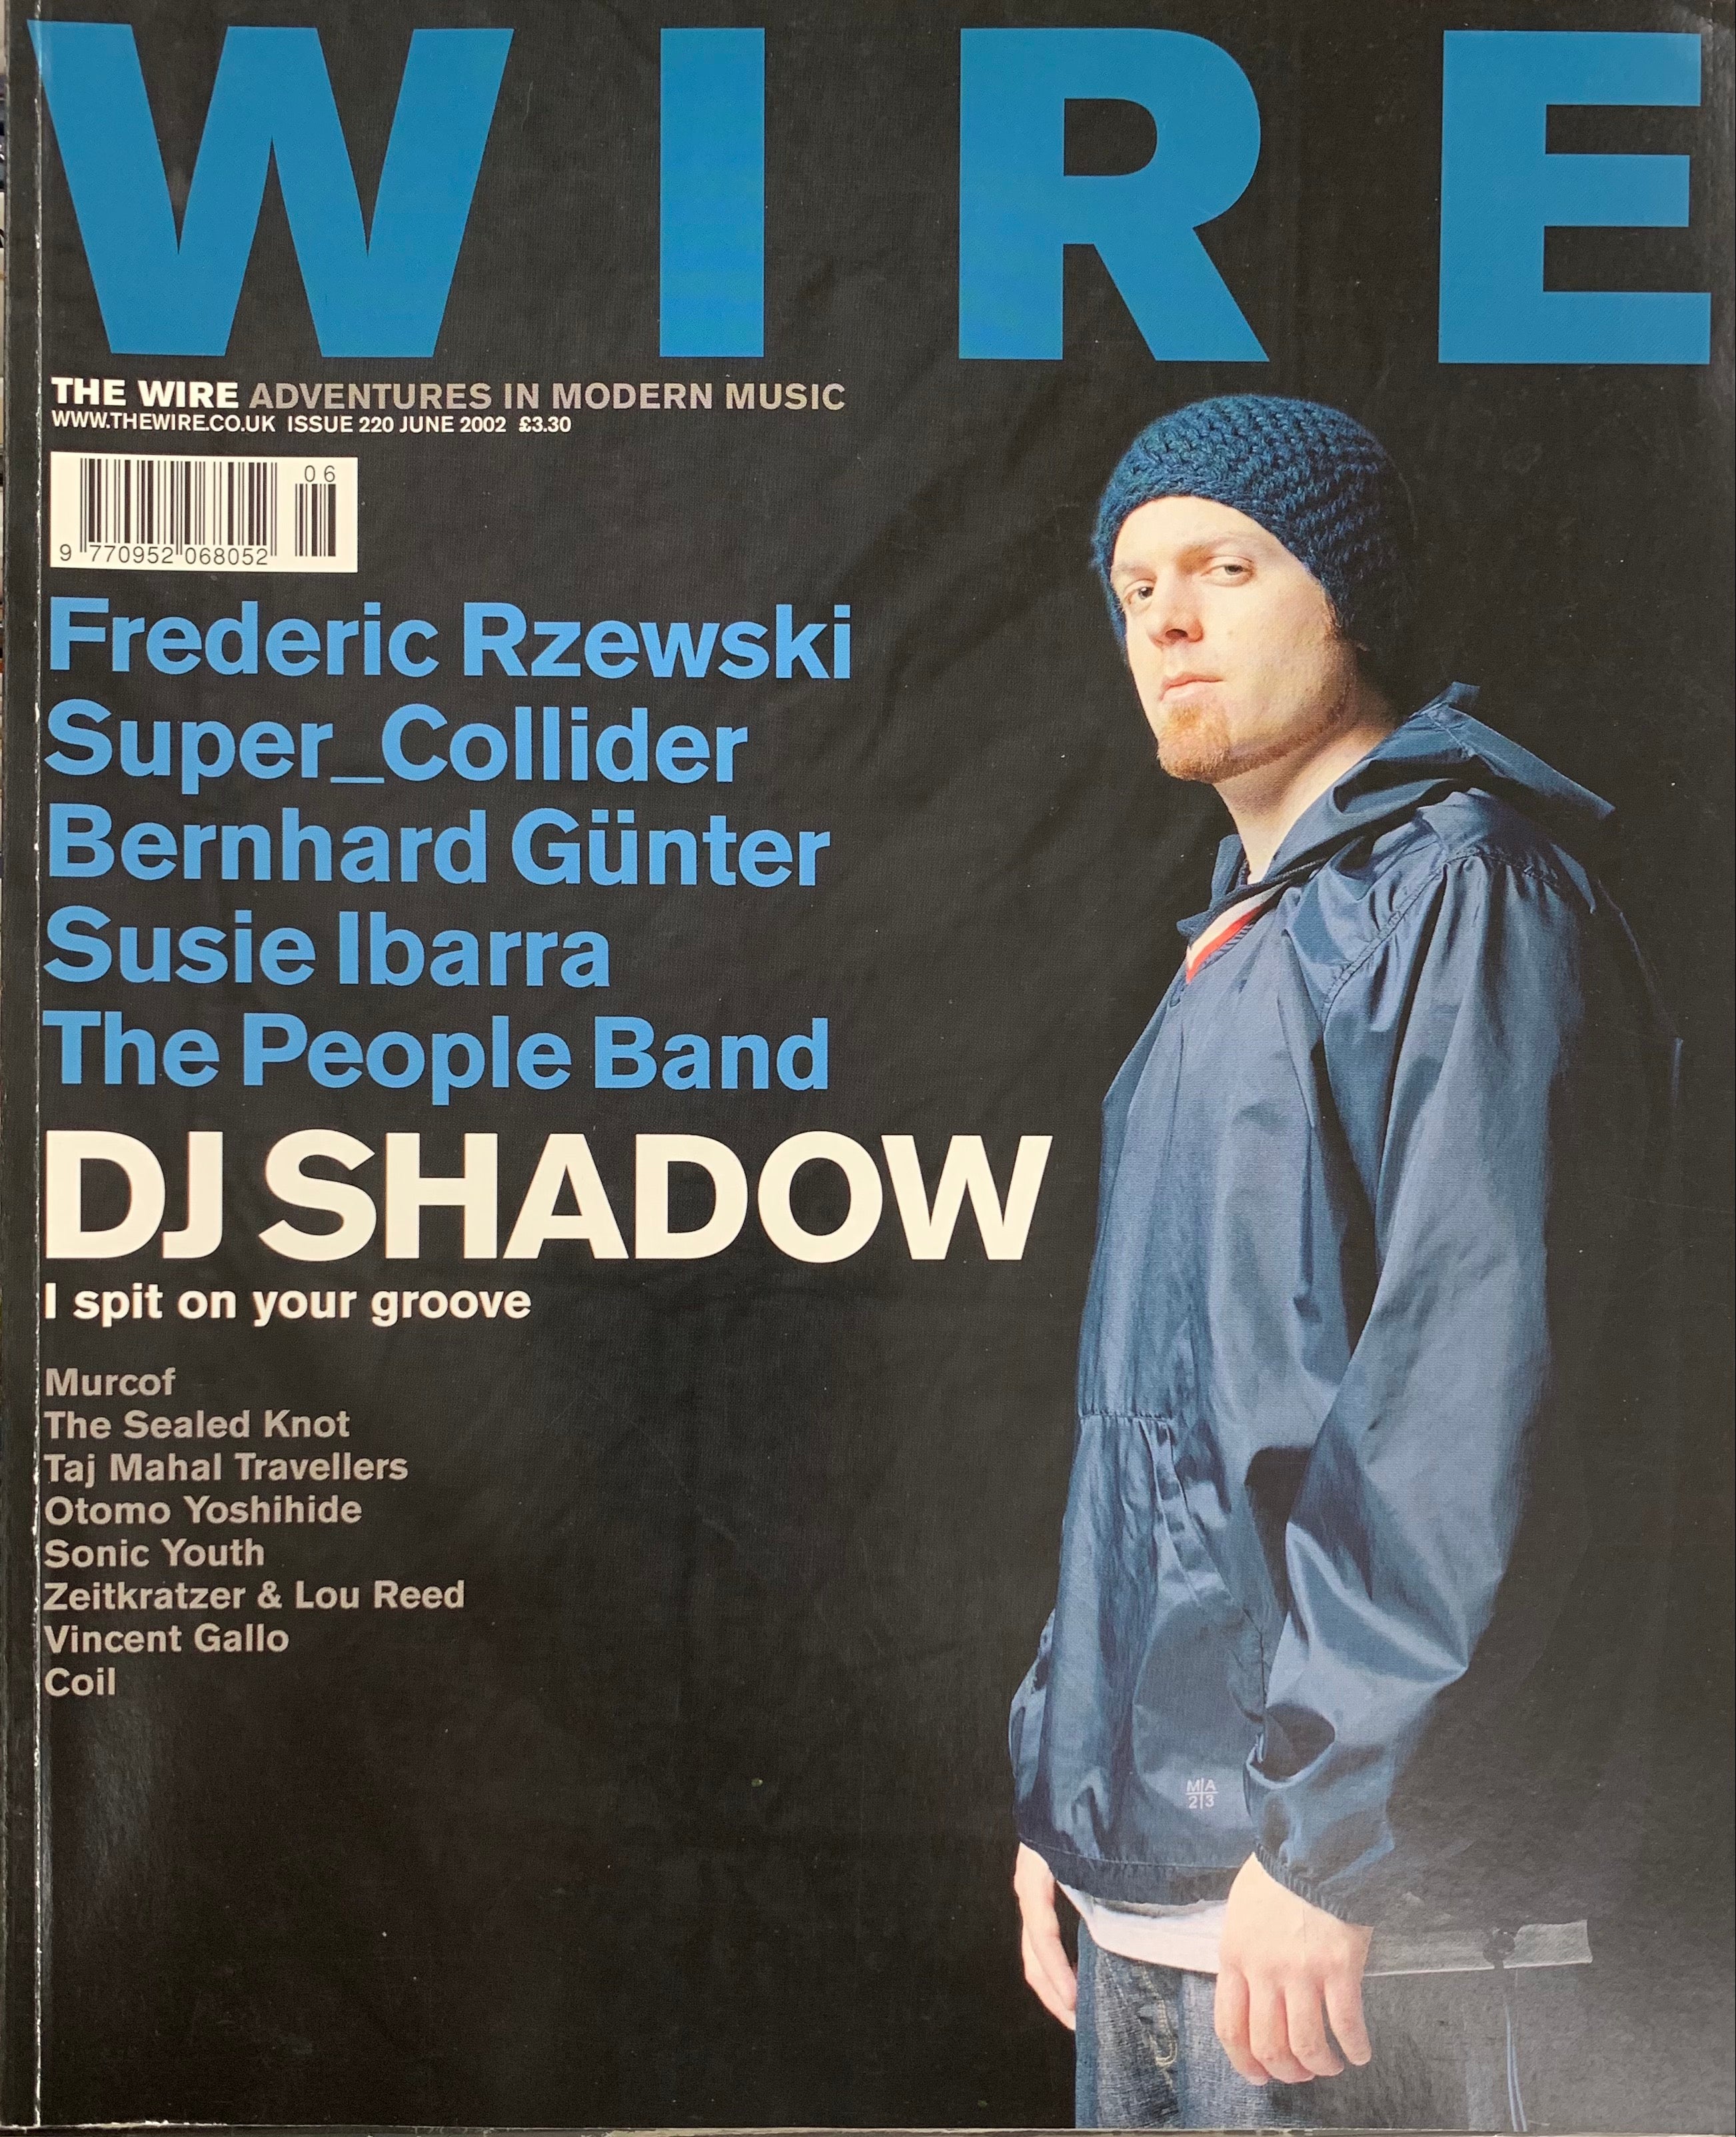 The Wire: Adventures In Modern Music